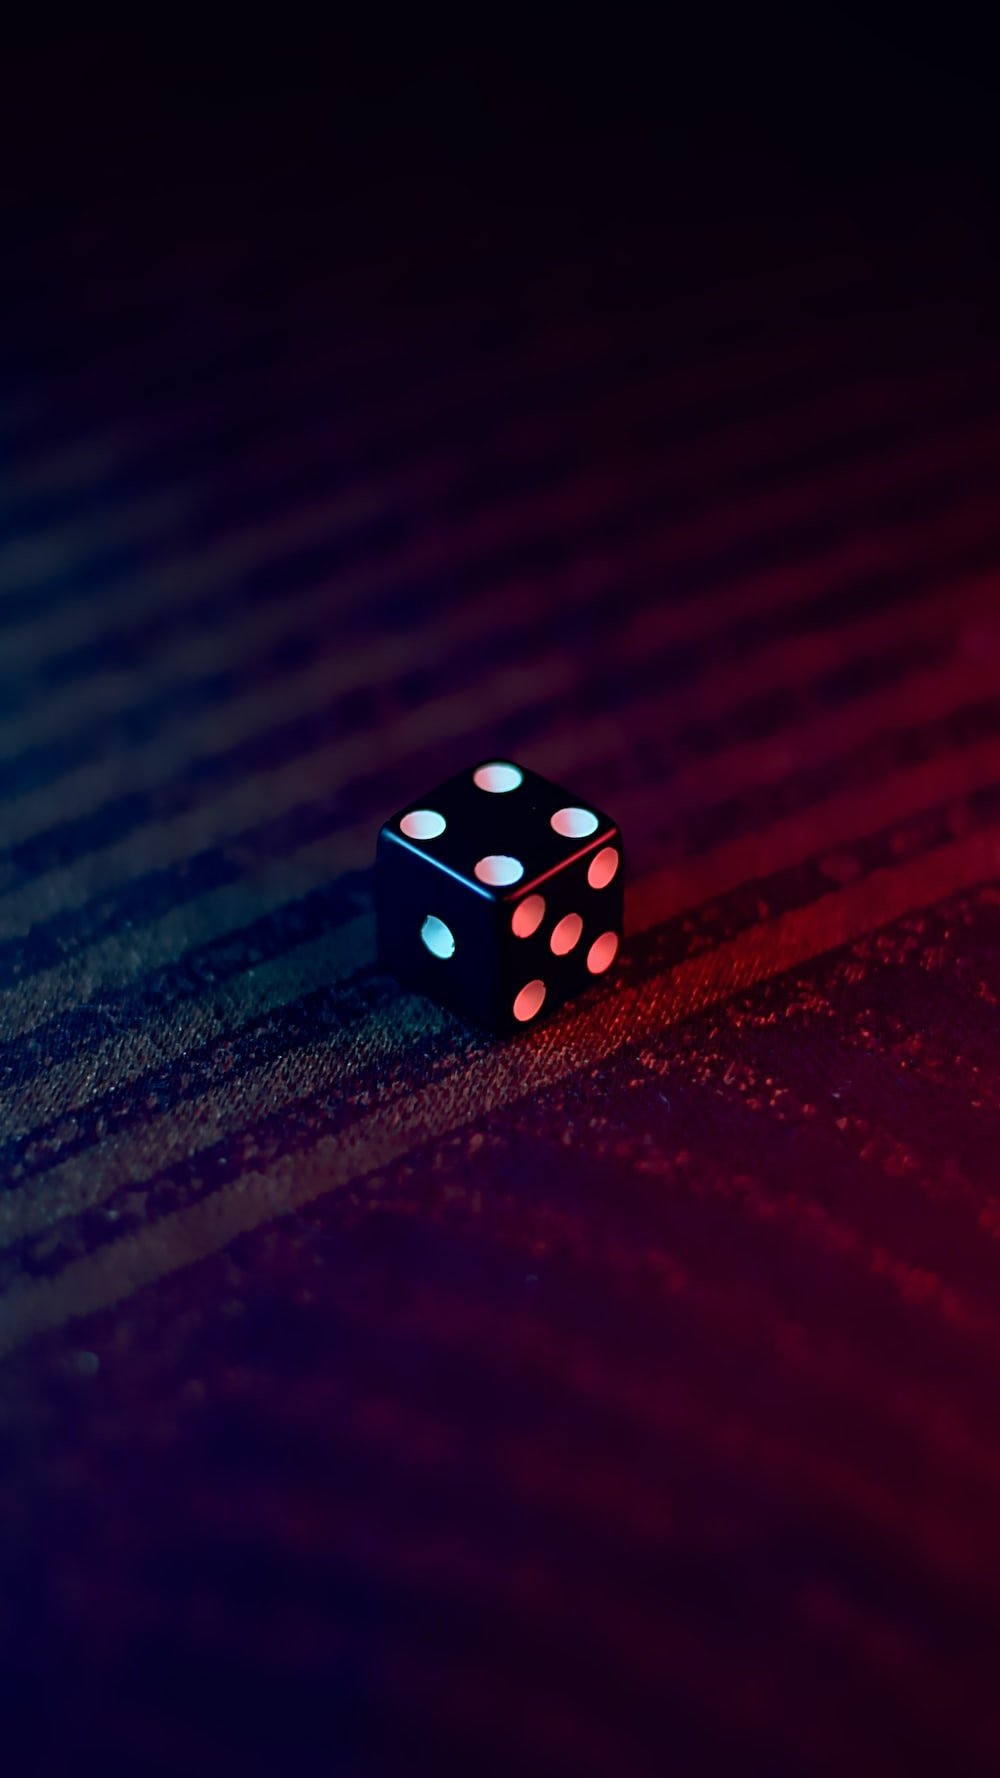 white and black dice on red textile photo